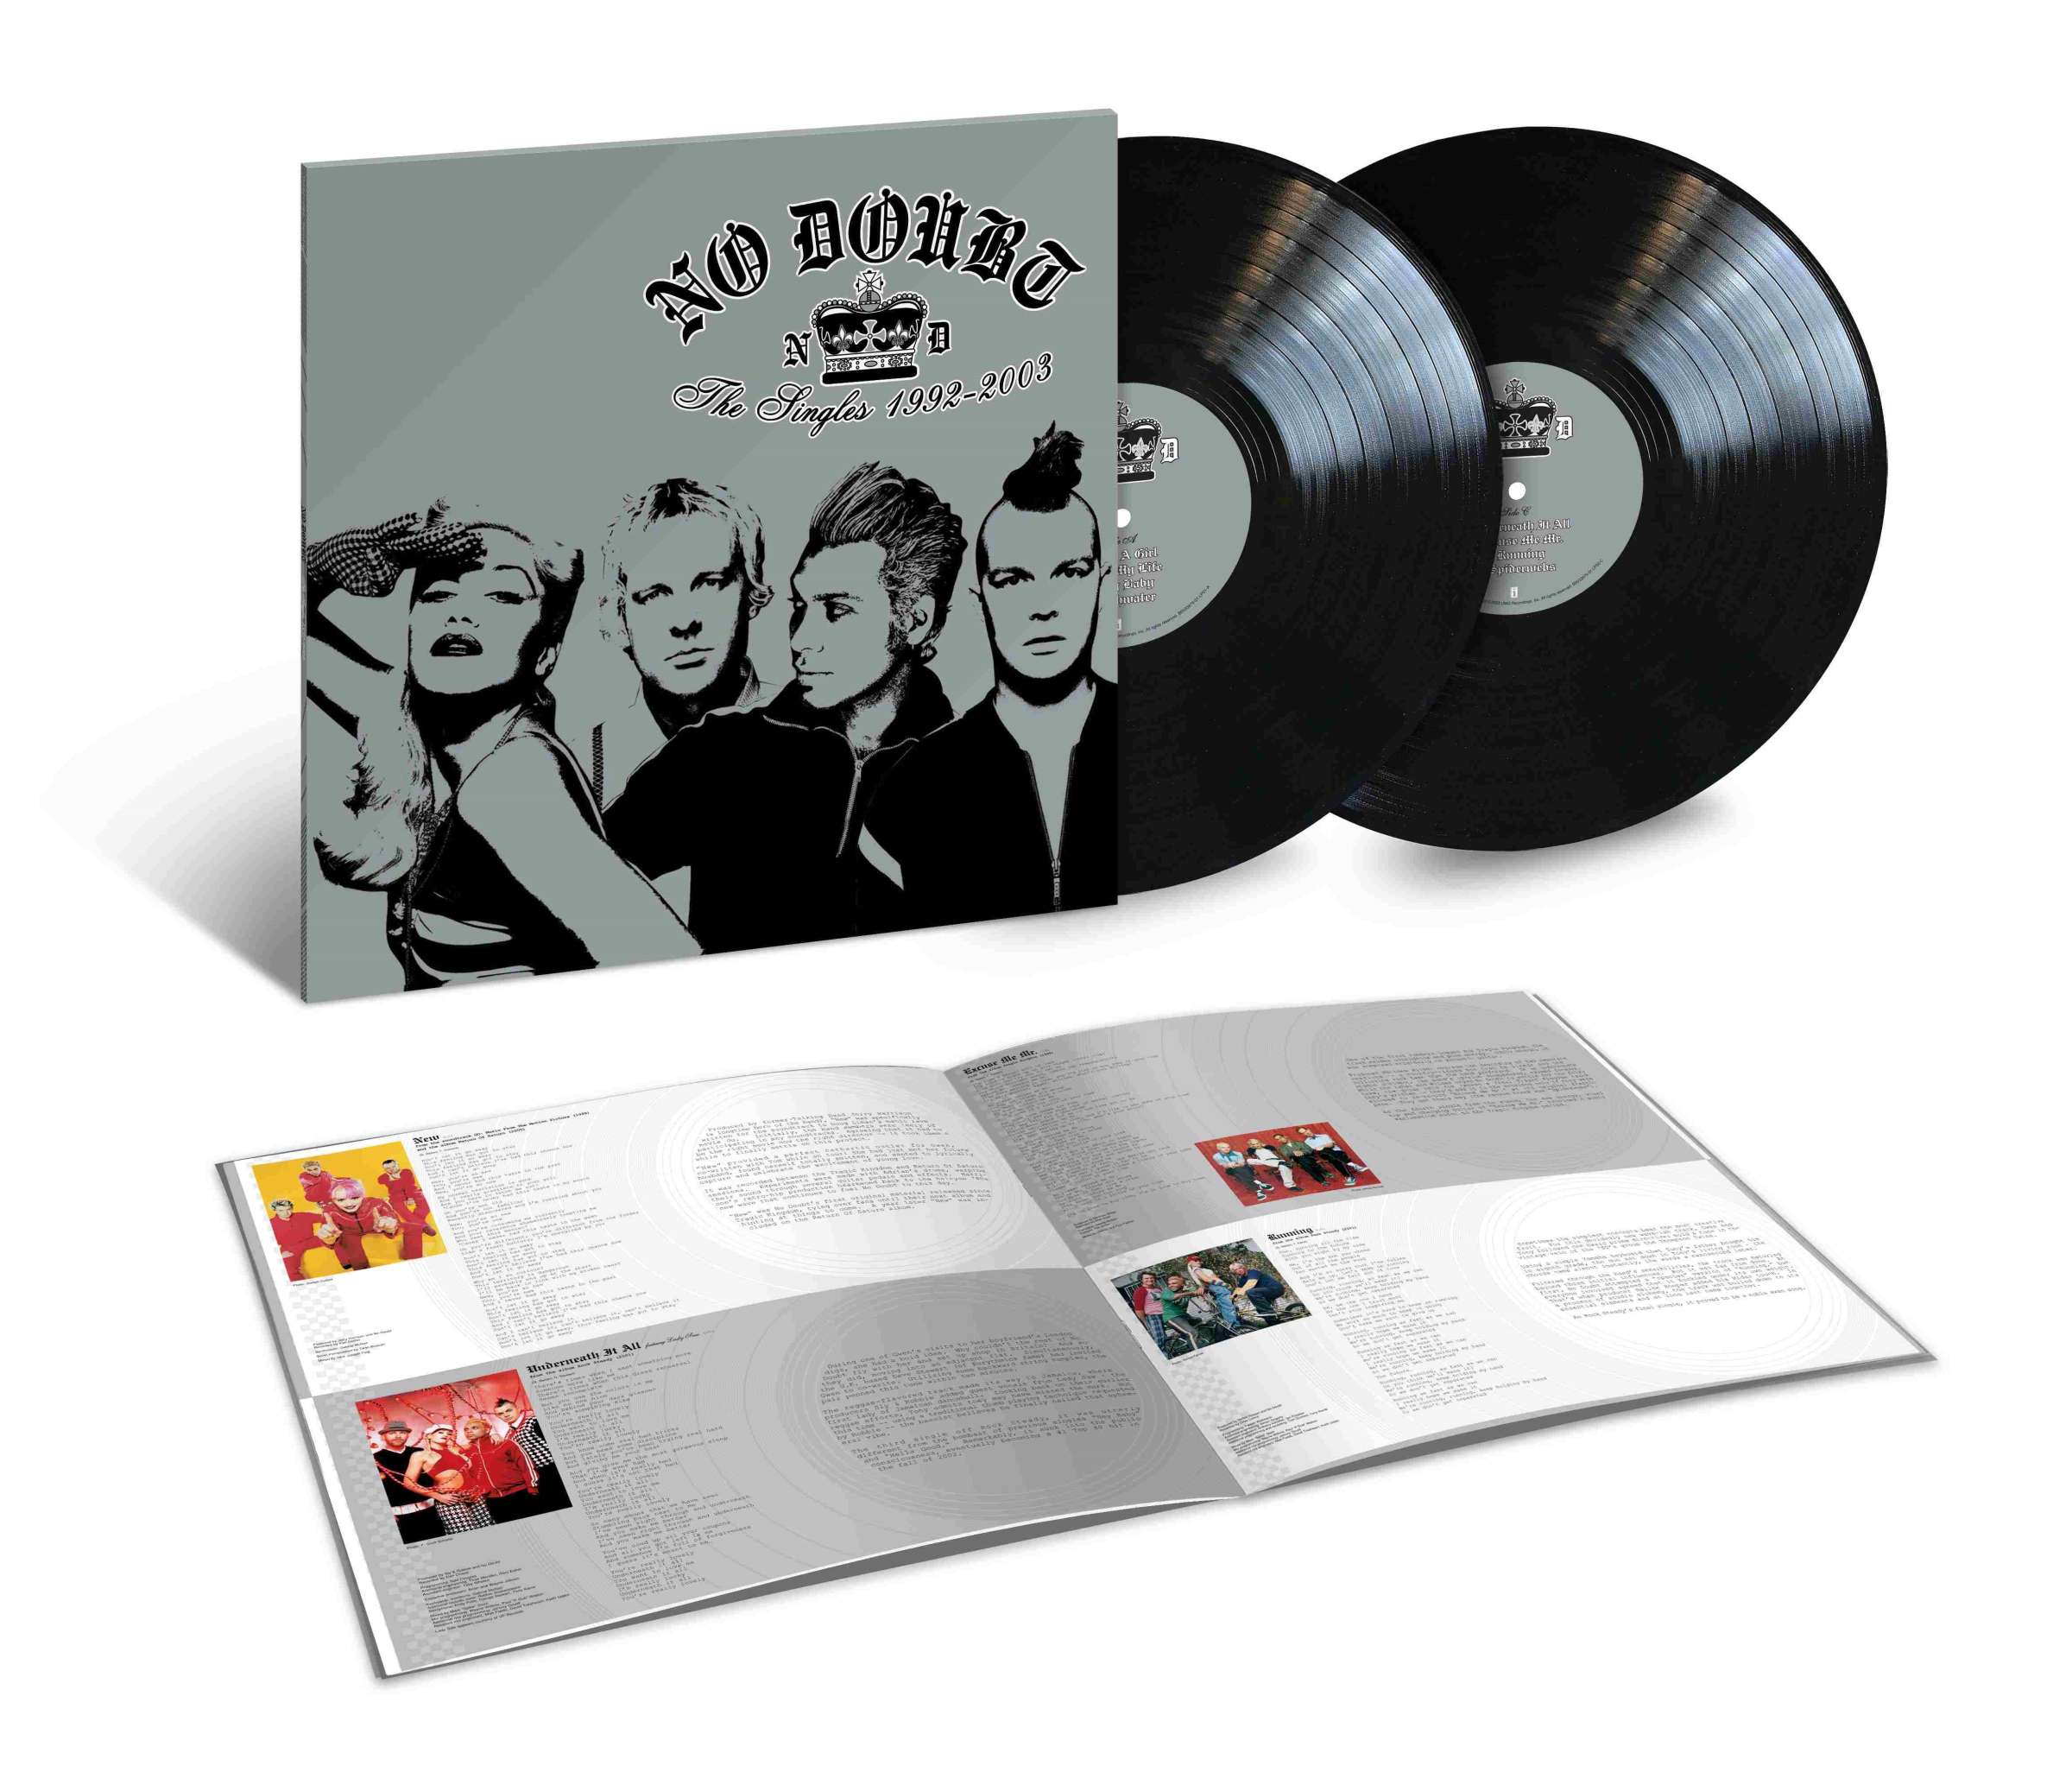 No Doubt - The Singles 1992-2003 (602465213492)